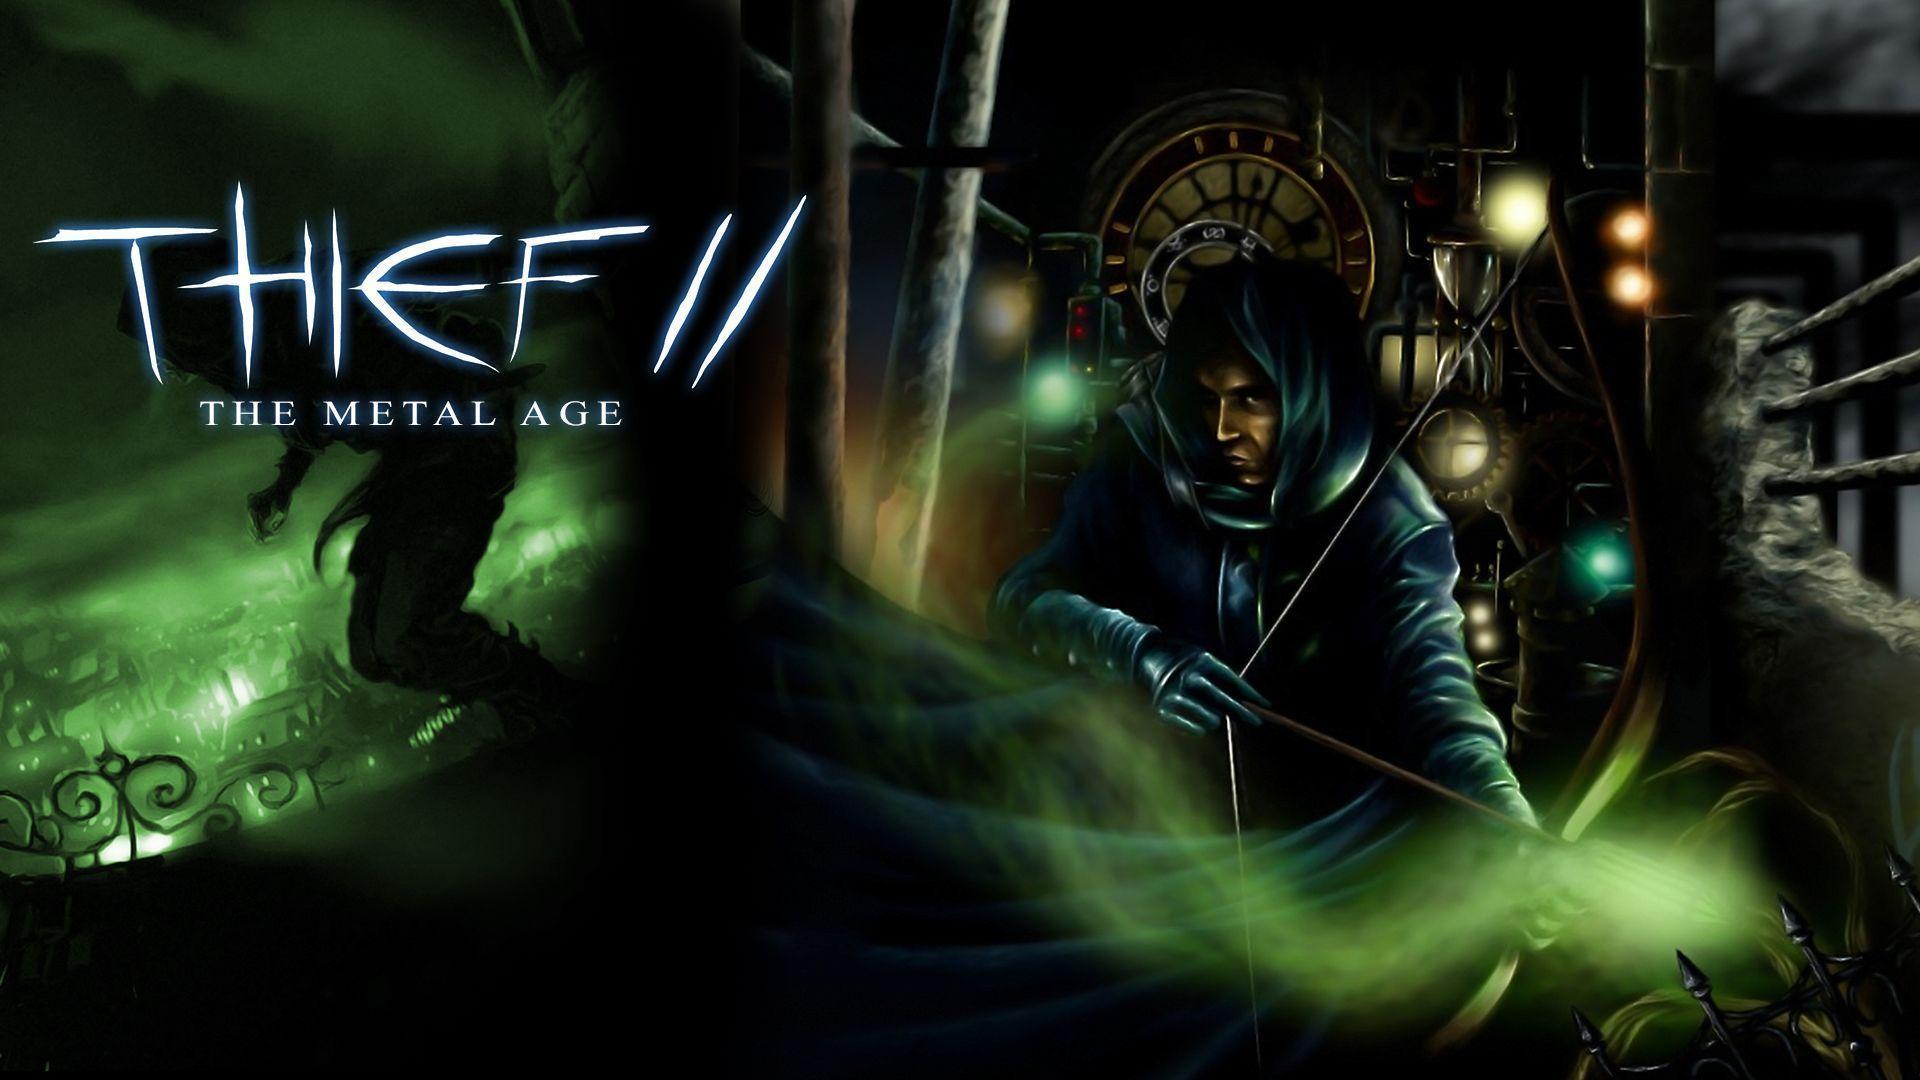 Thief II: The Metal Age HD Wallpaper. Background